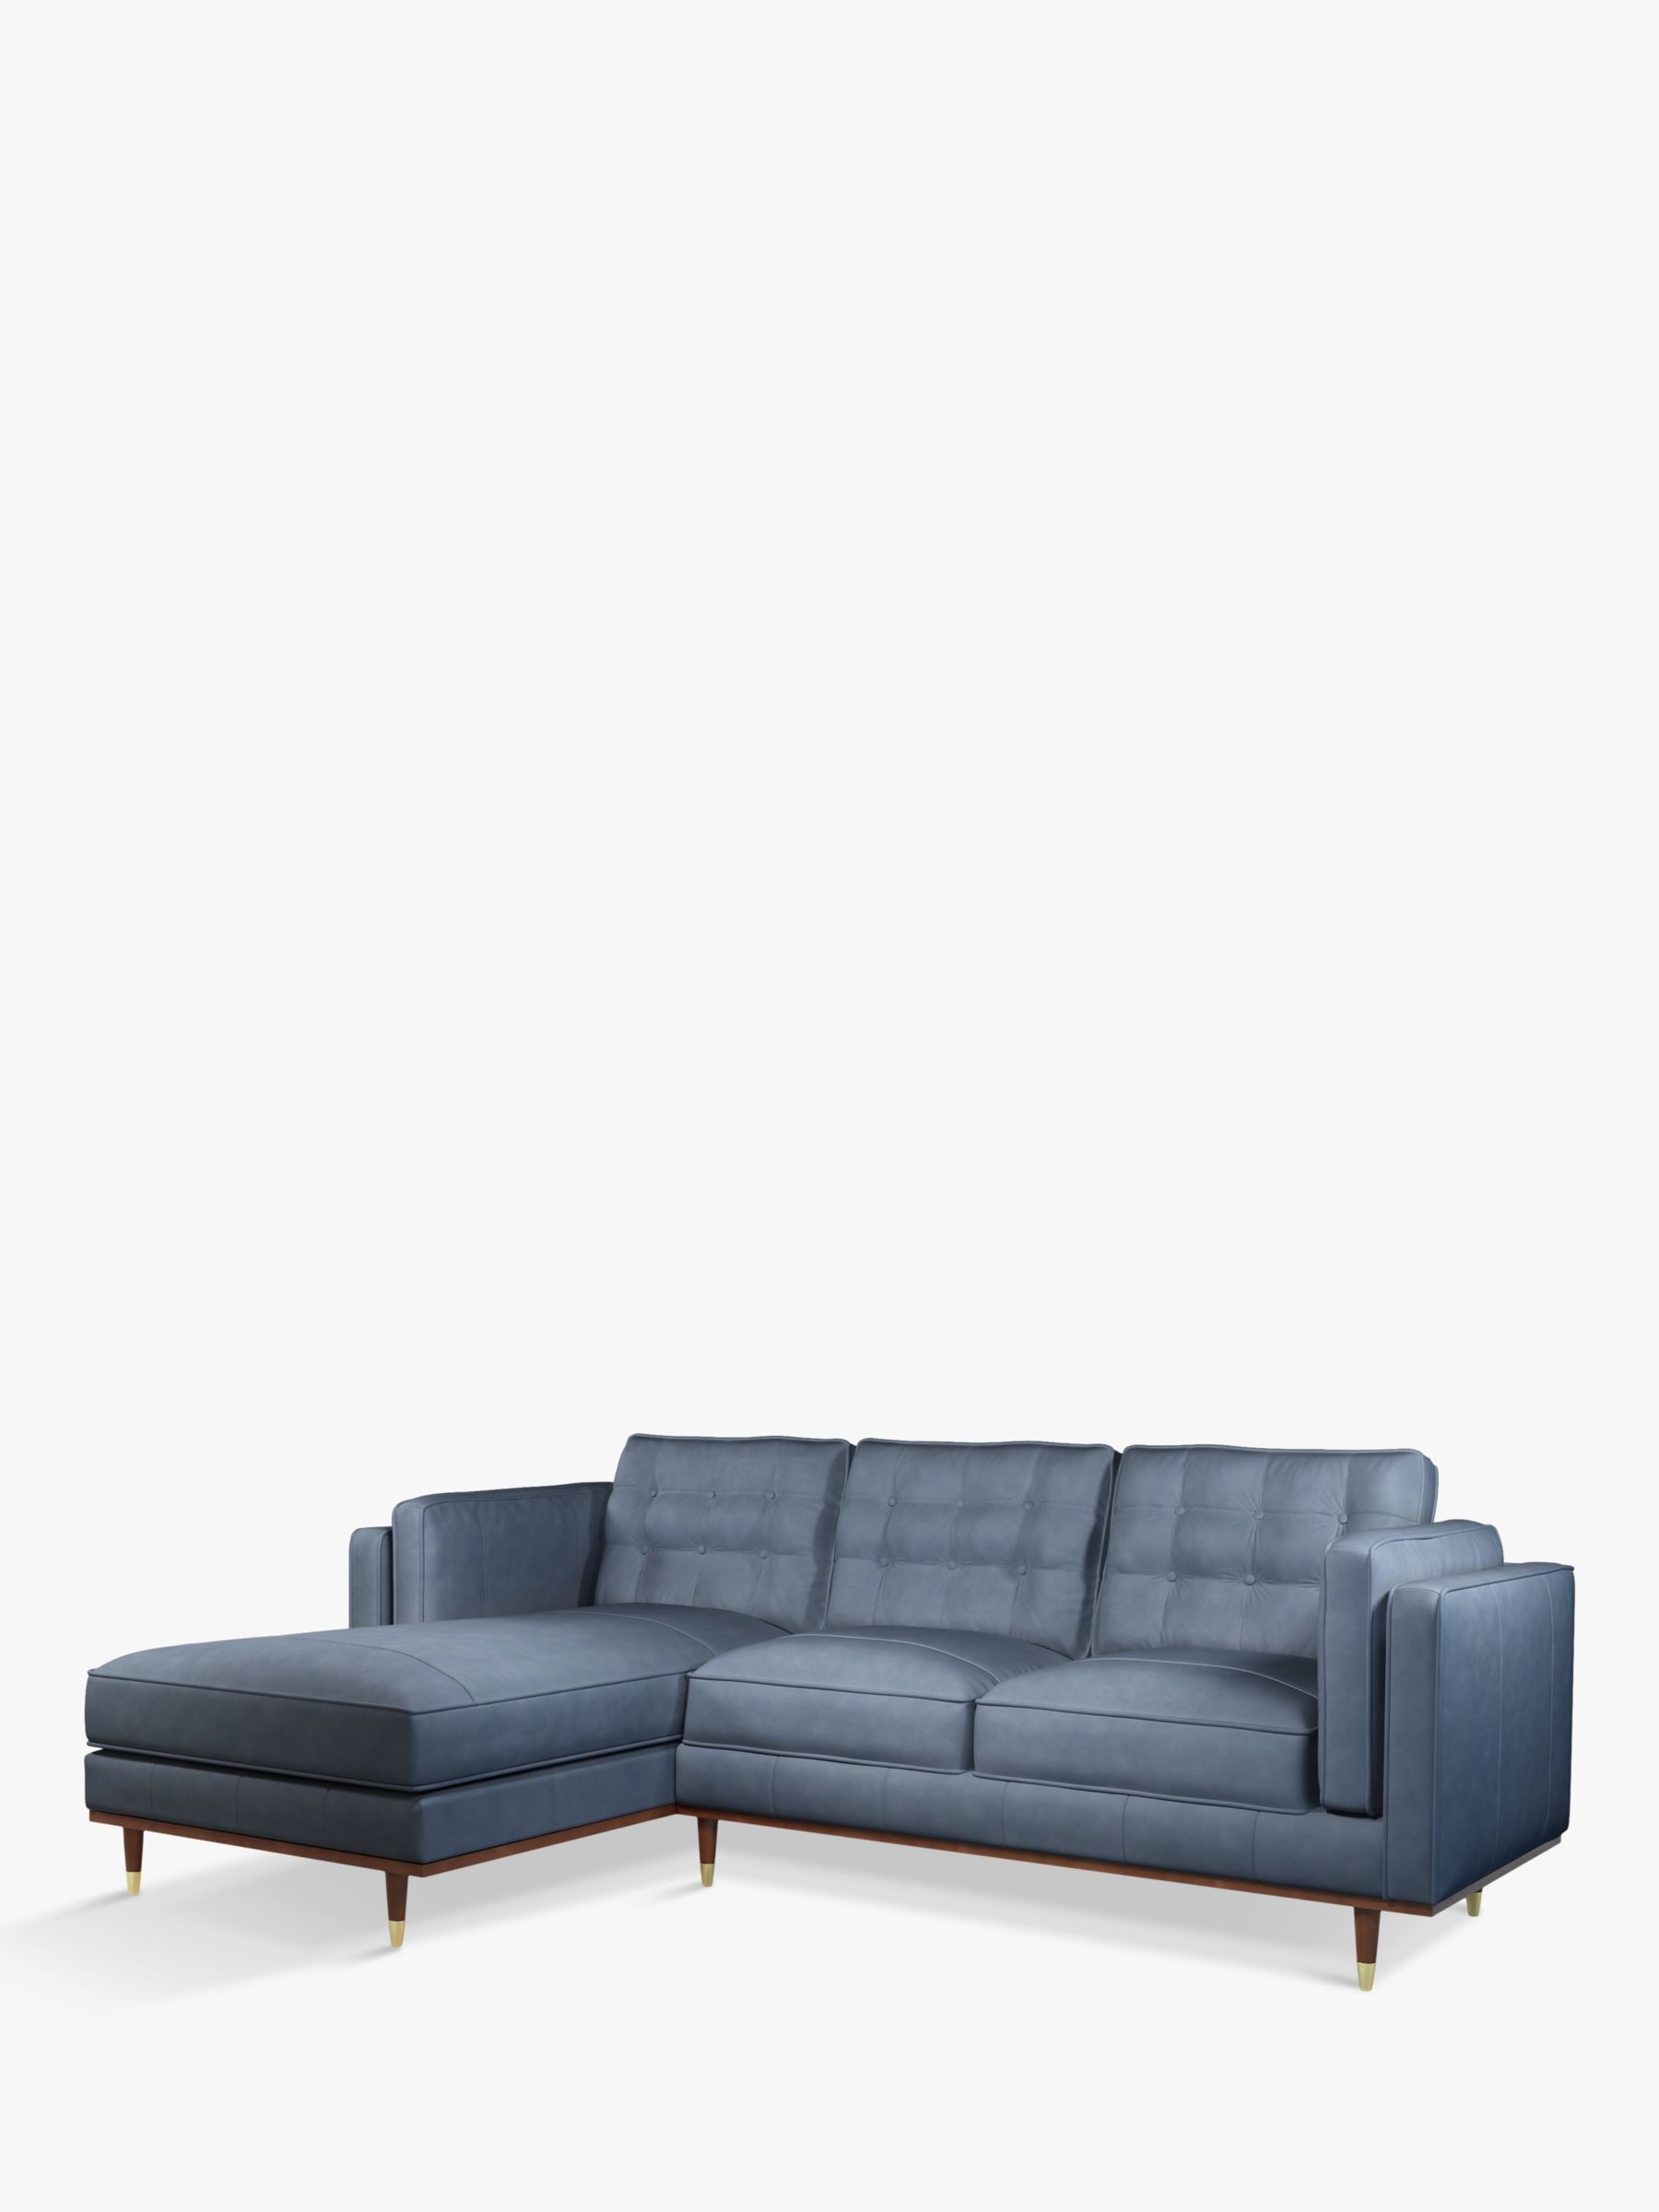 Photo of John lewis + swoon lyon lhf chaise end leather sofa